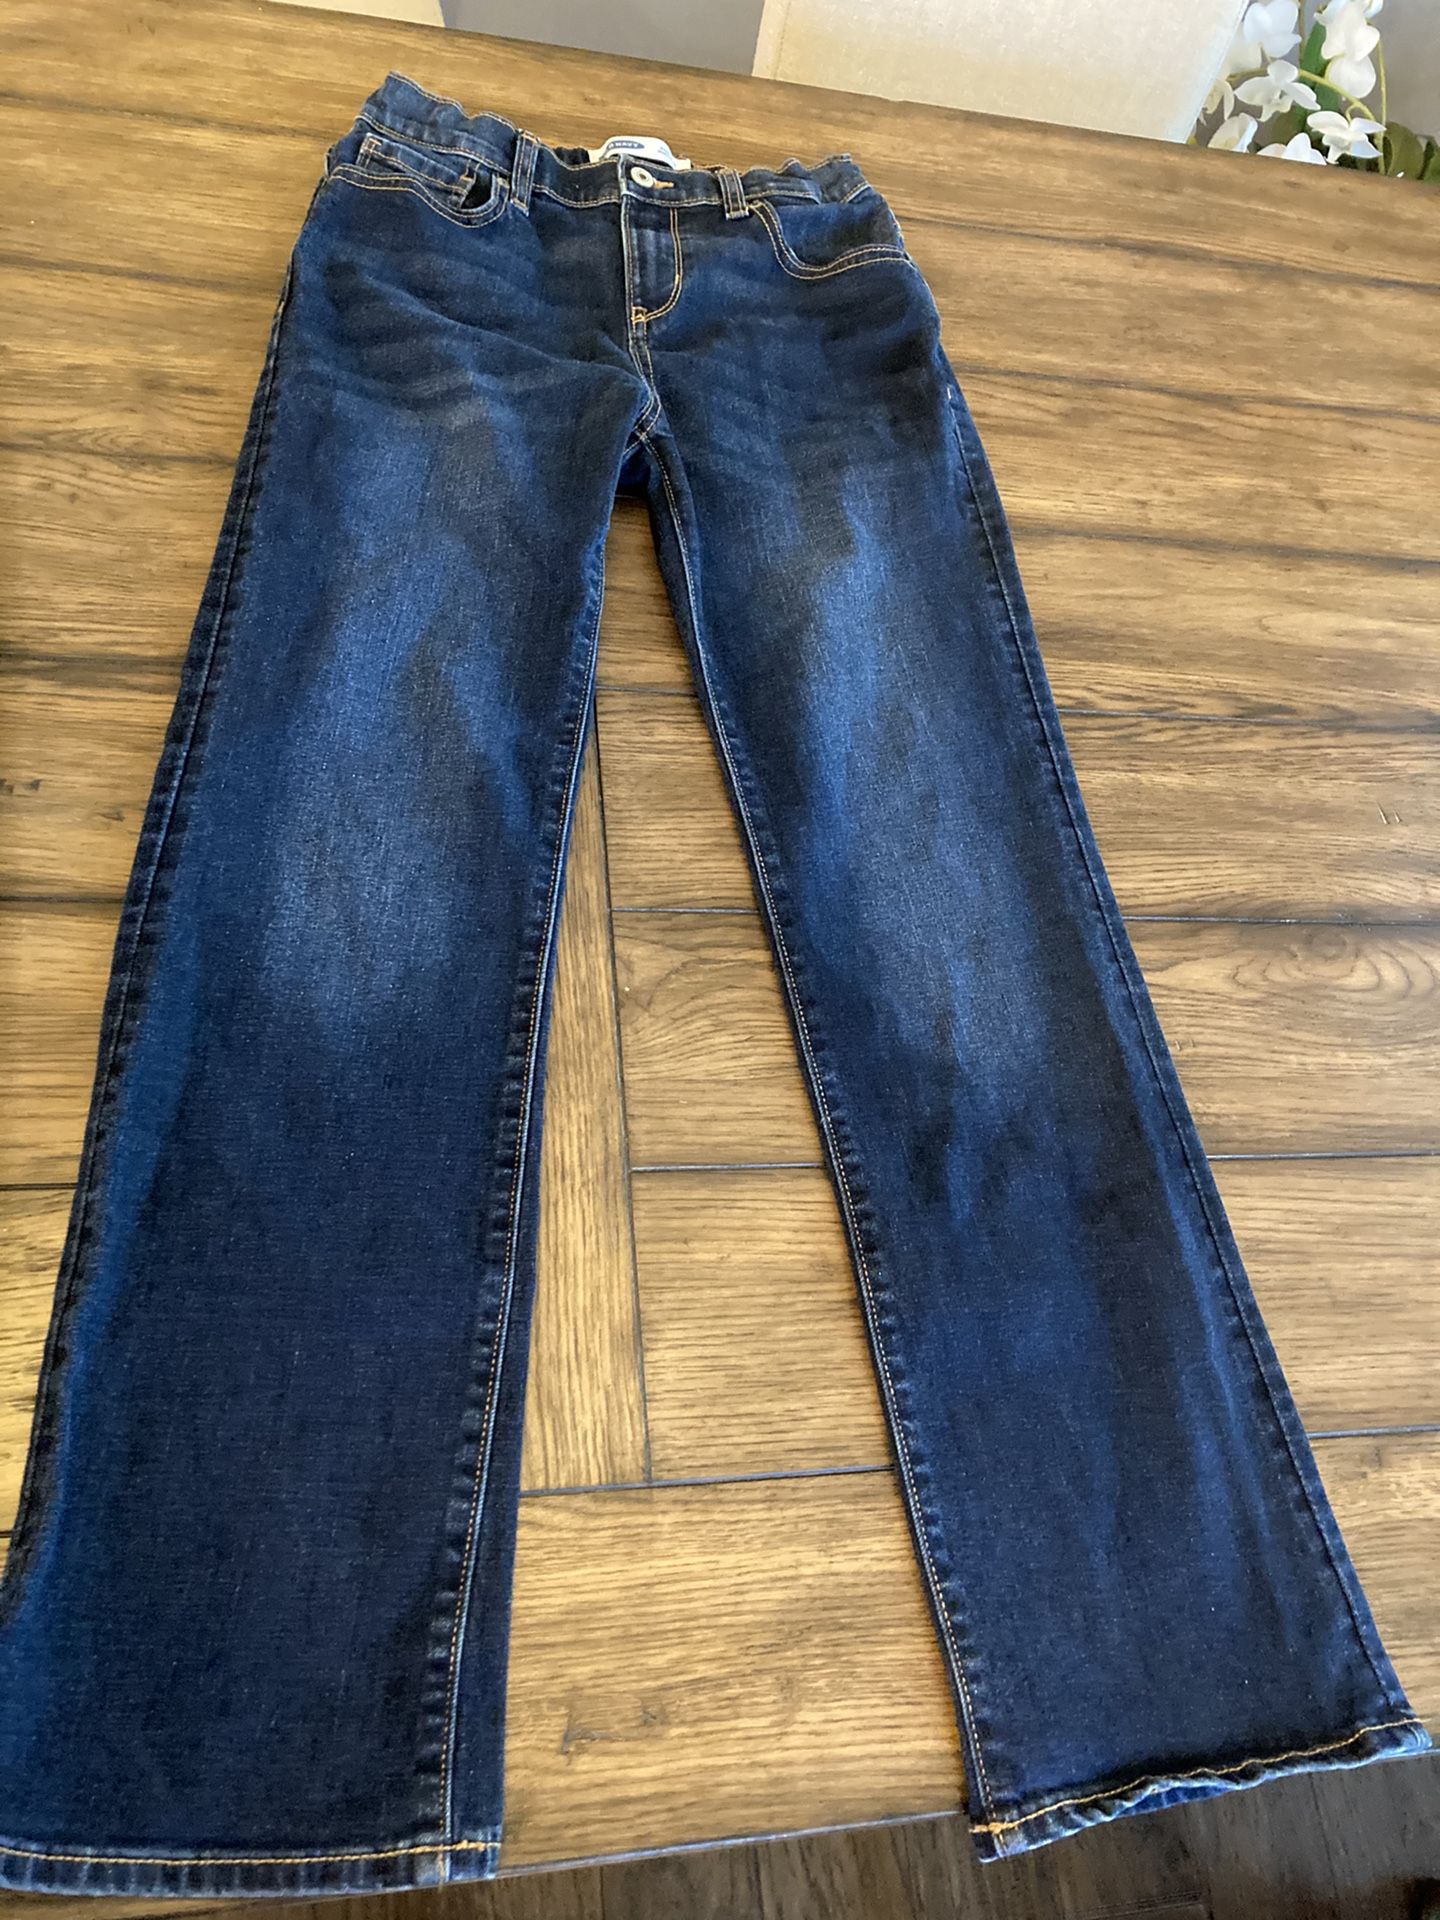 BOYS SIZE 14 JEANS LIKE NEW & NEW